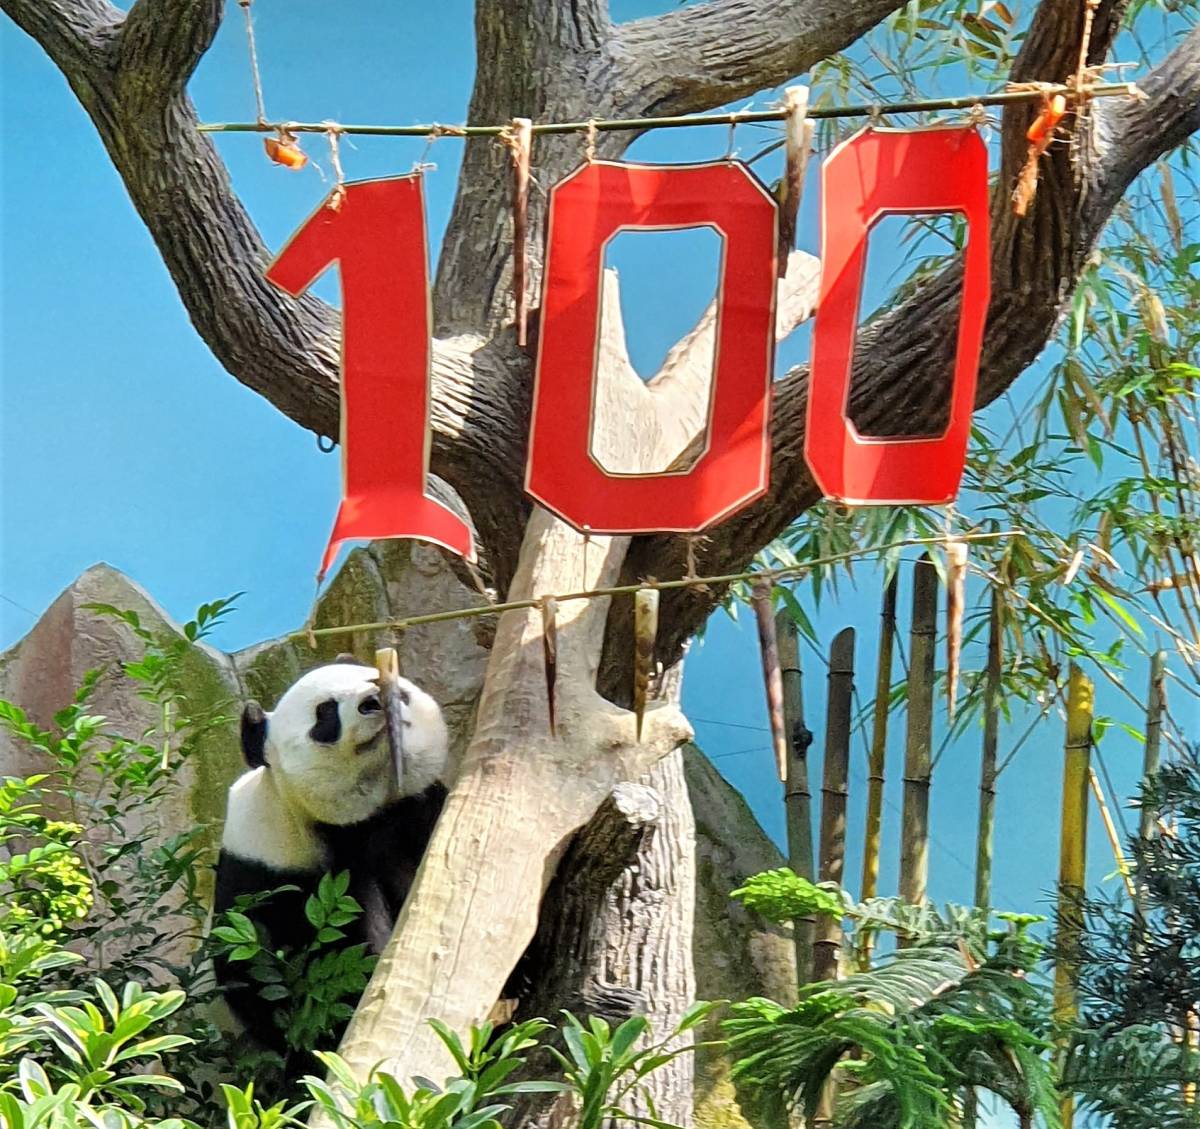 Singapore’s Giant Panda Cub Celebrates 100 Days With His First Baby Steps